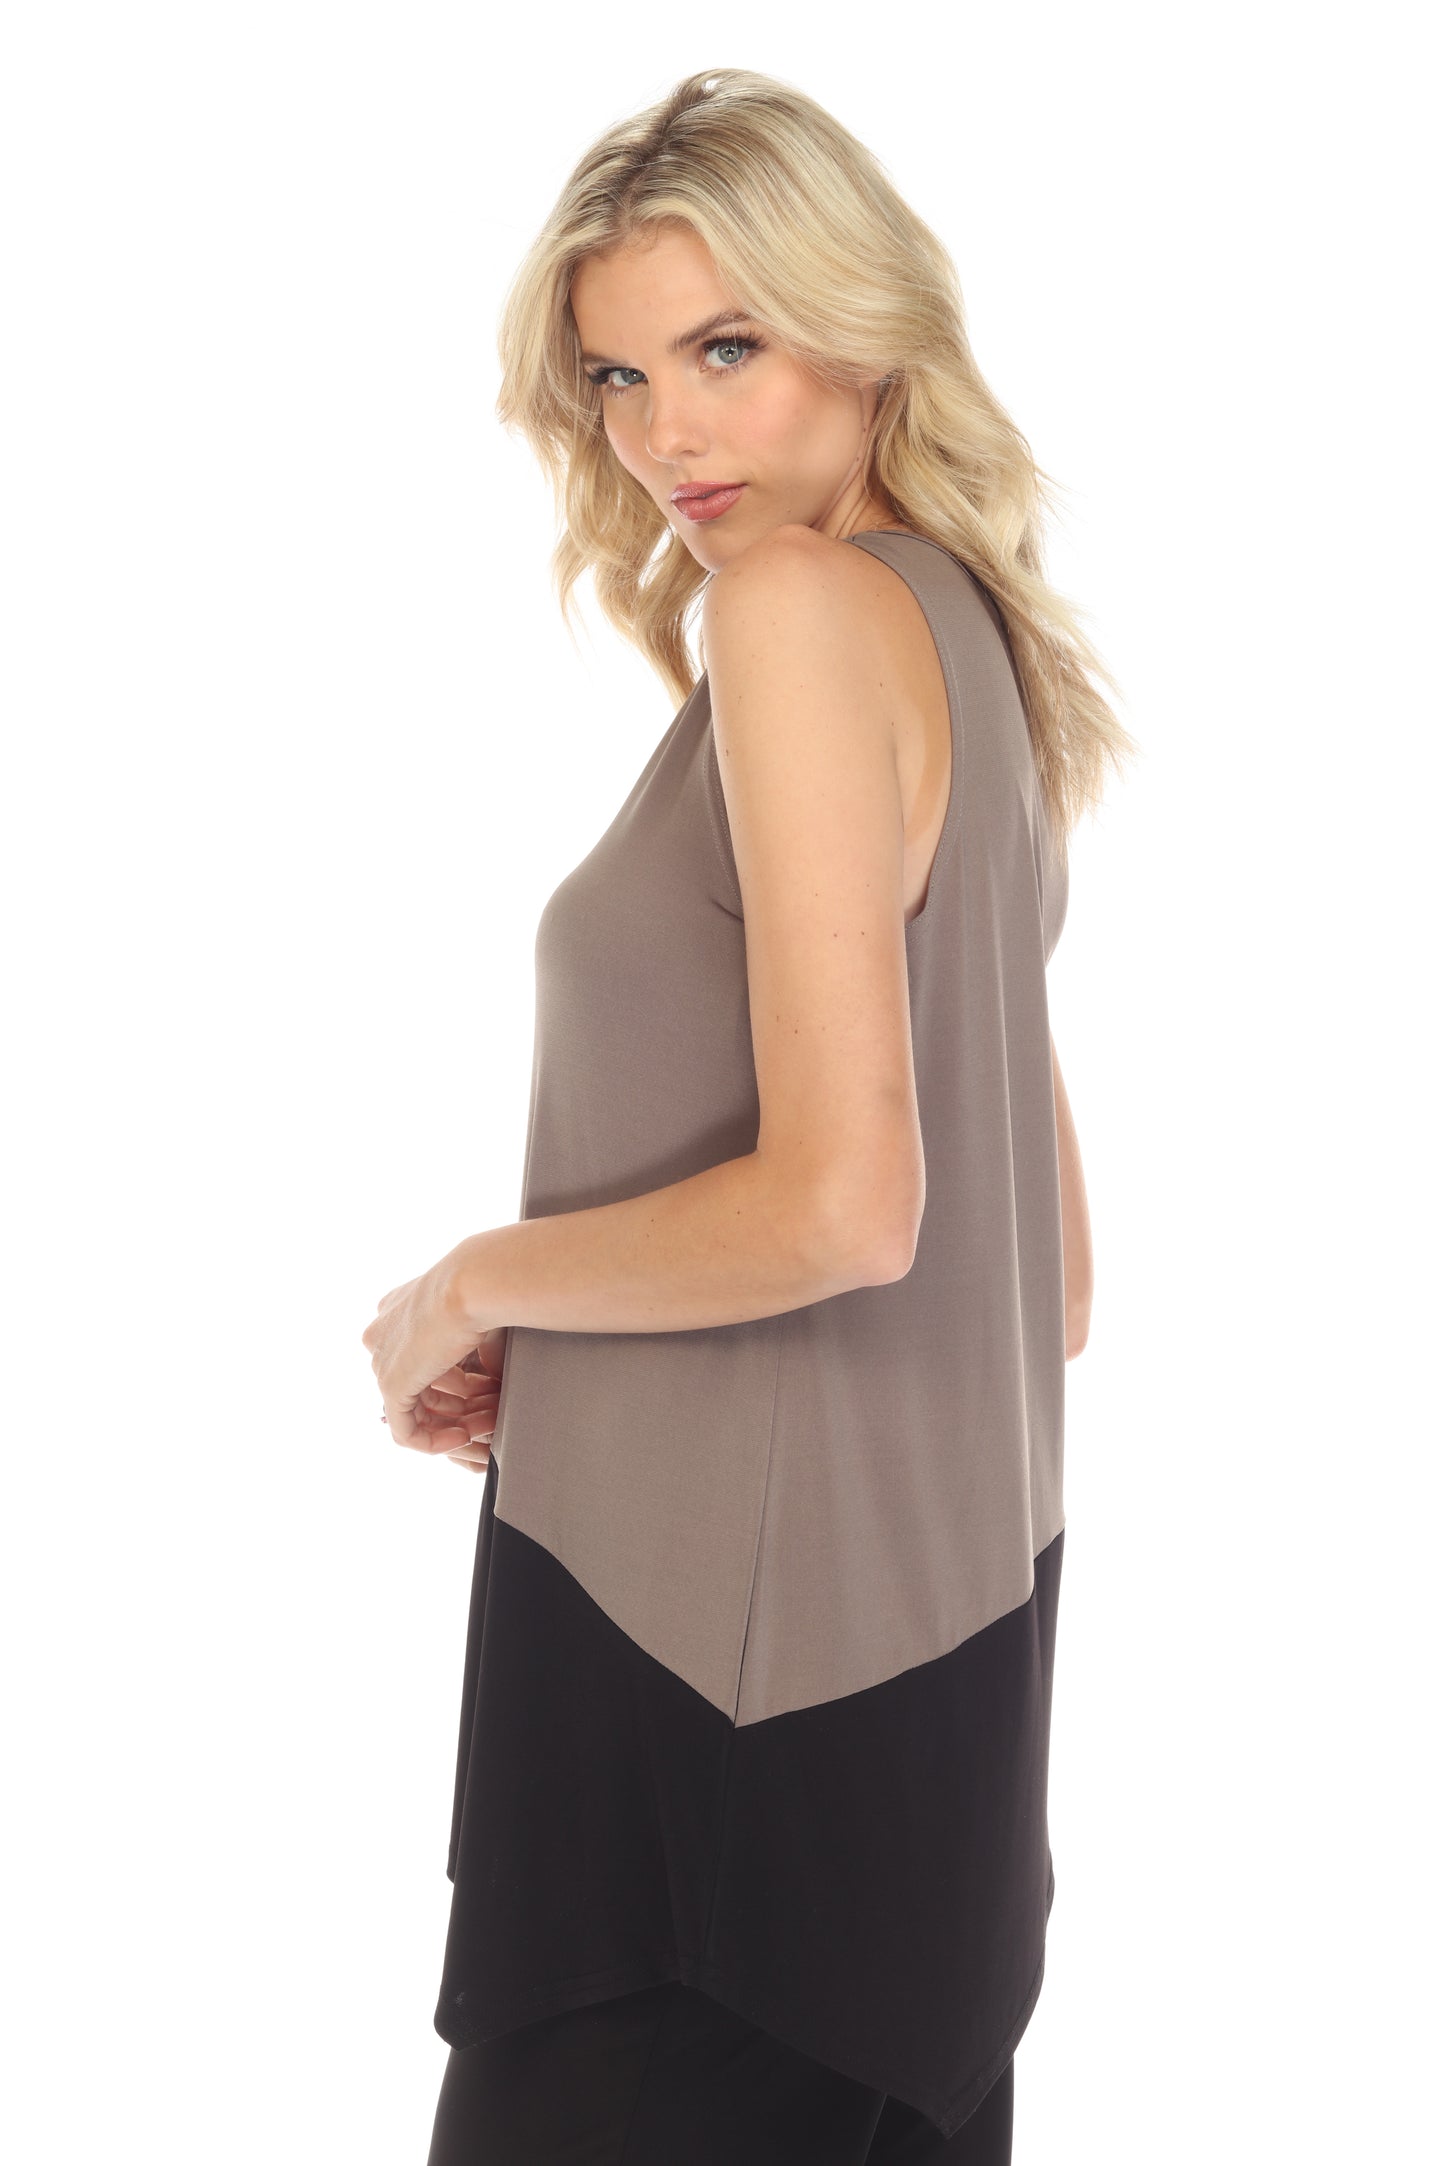 Color block Sleeveless Top-2062HT-TRS1-C